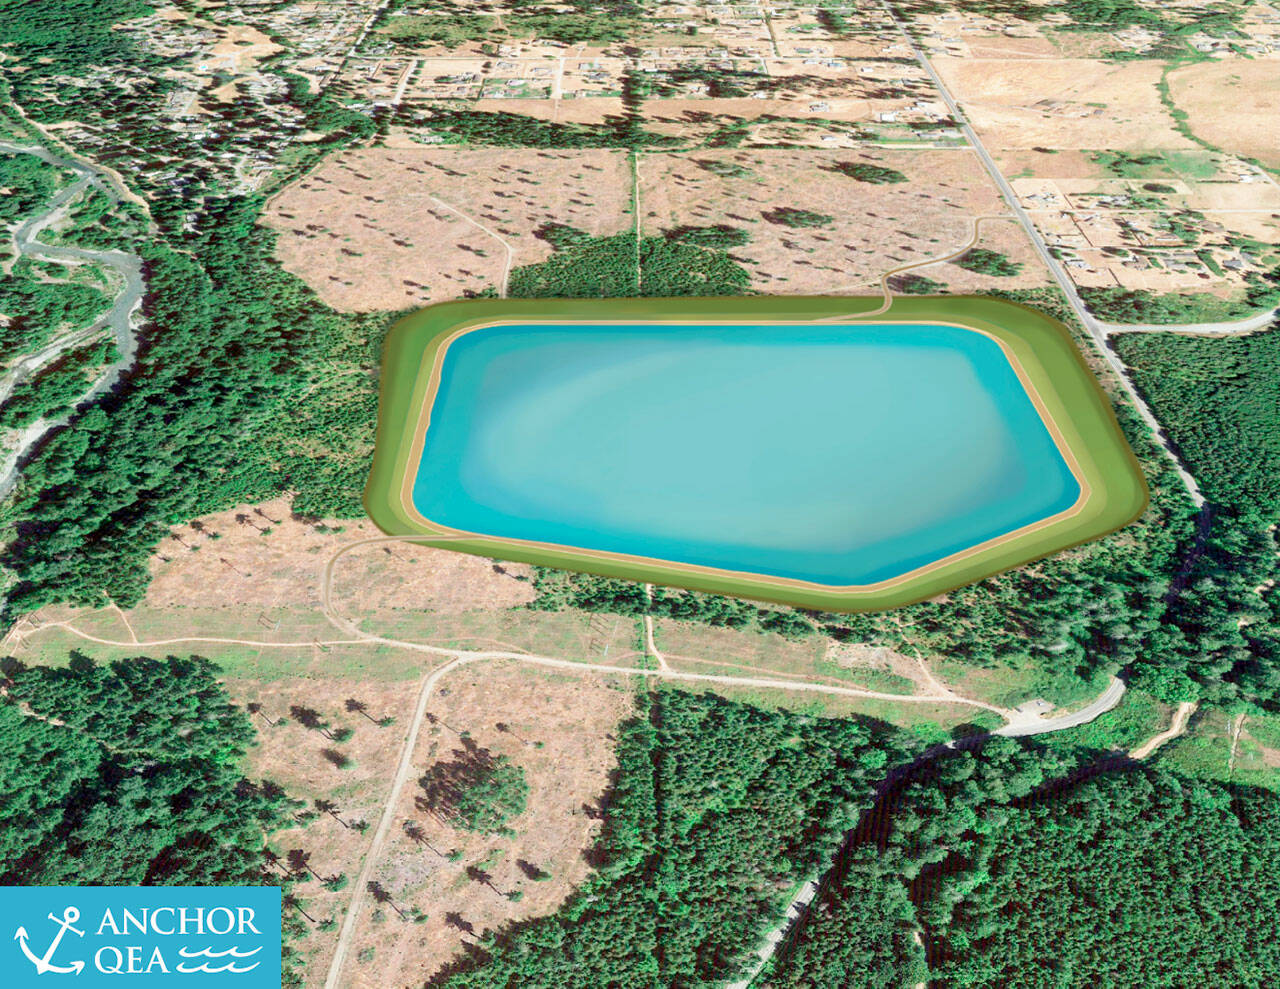 The Dungeness Off-Channel Reservoir is pictured in an artist’s rendering by Anchor QEA, the project’s engineering firm.